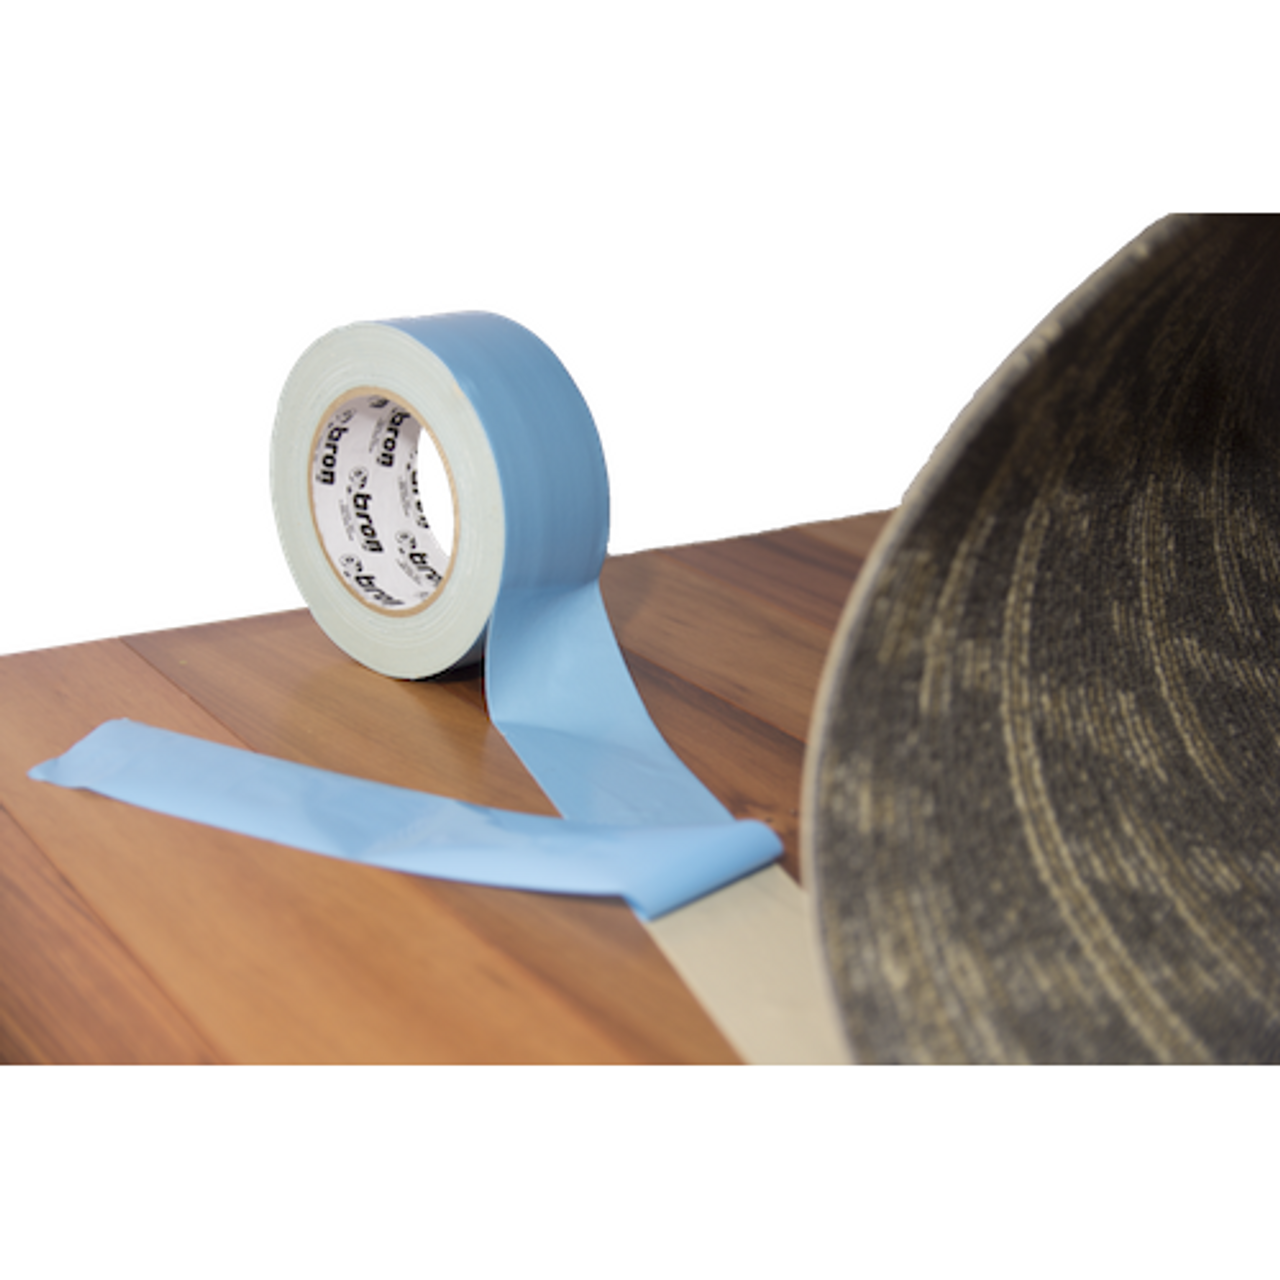 BT-105 General Purpose Double Sided Carpet Tape